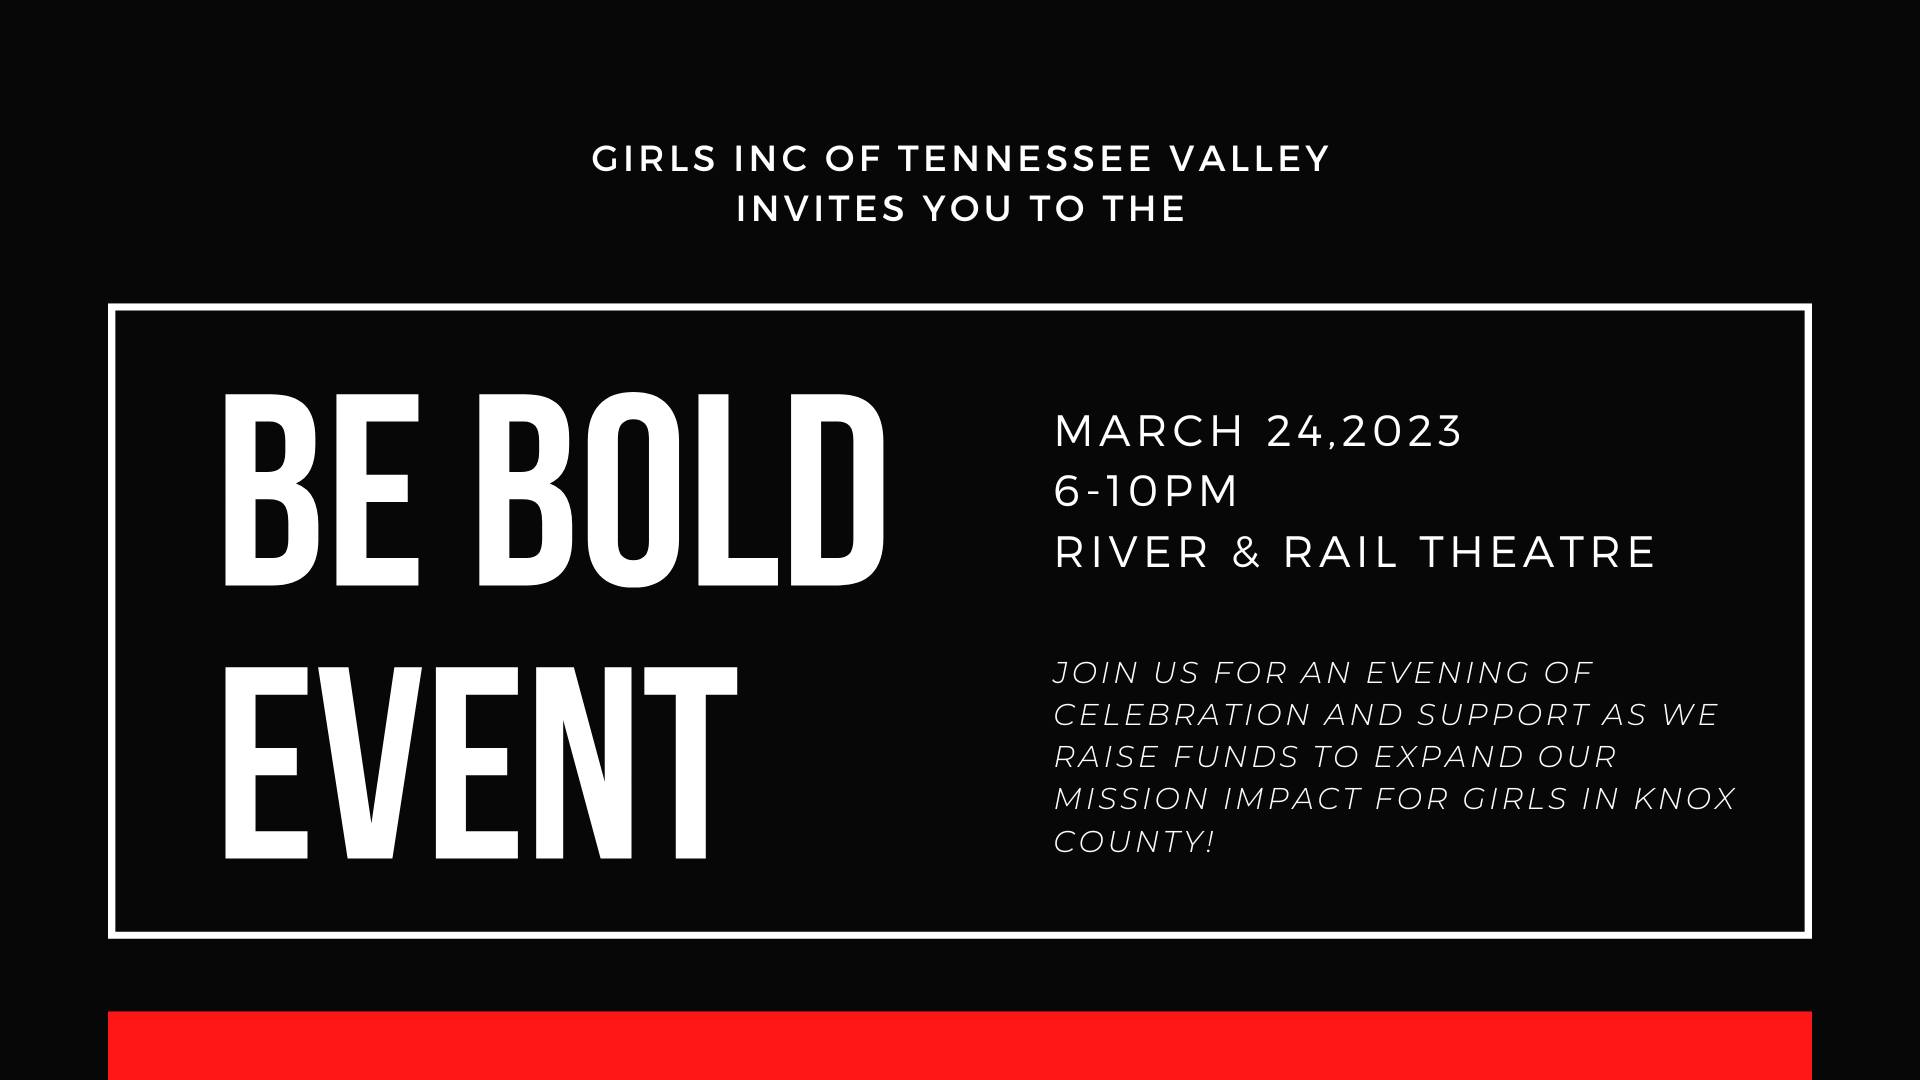 Be BOLD Event